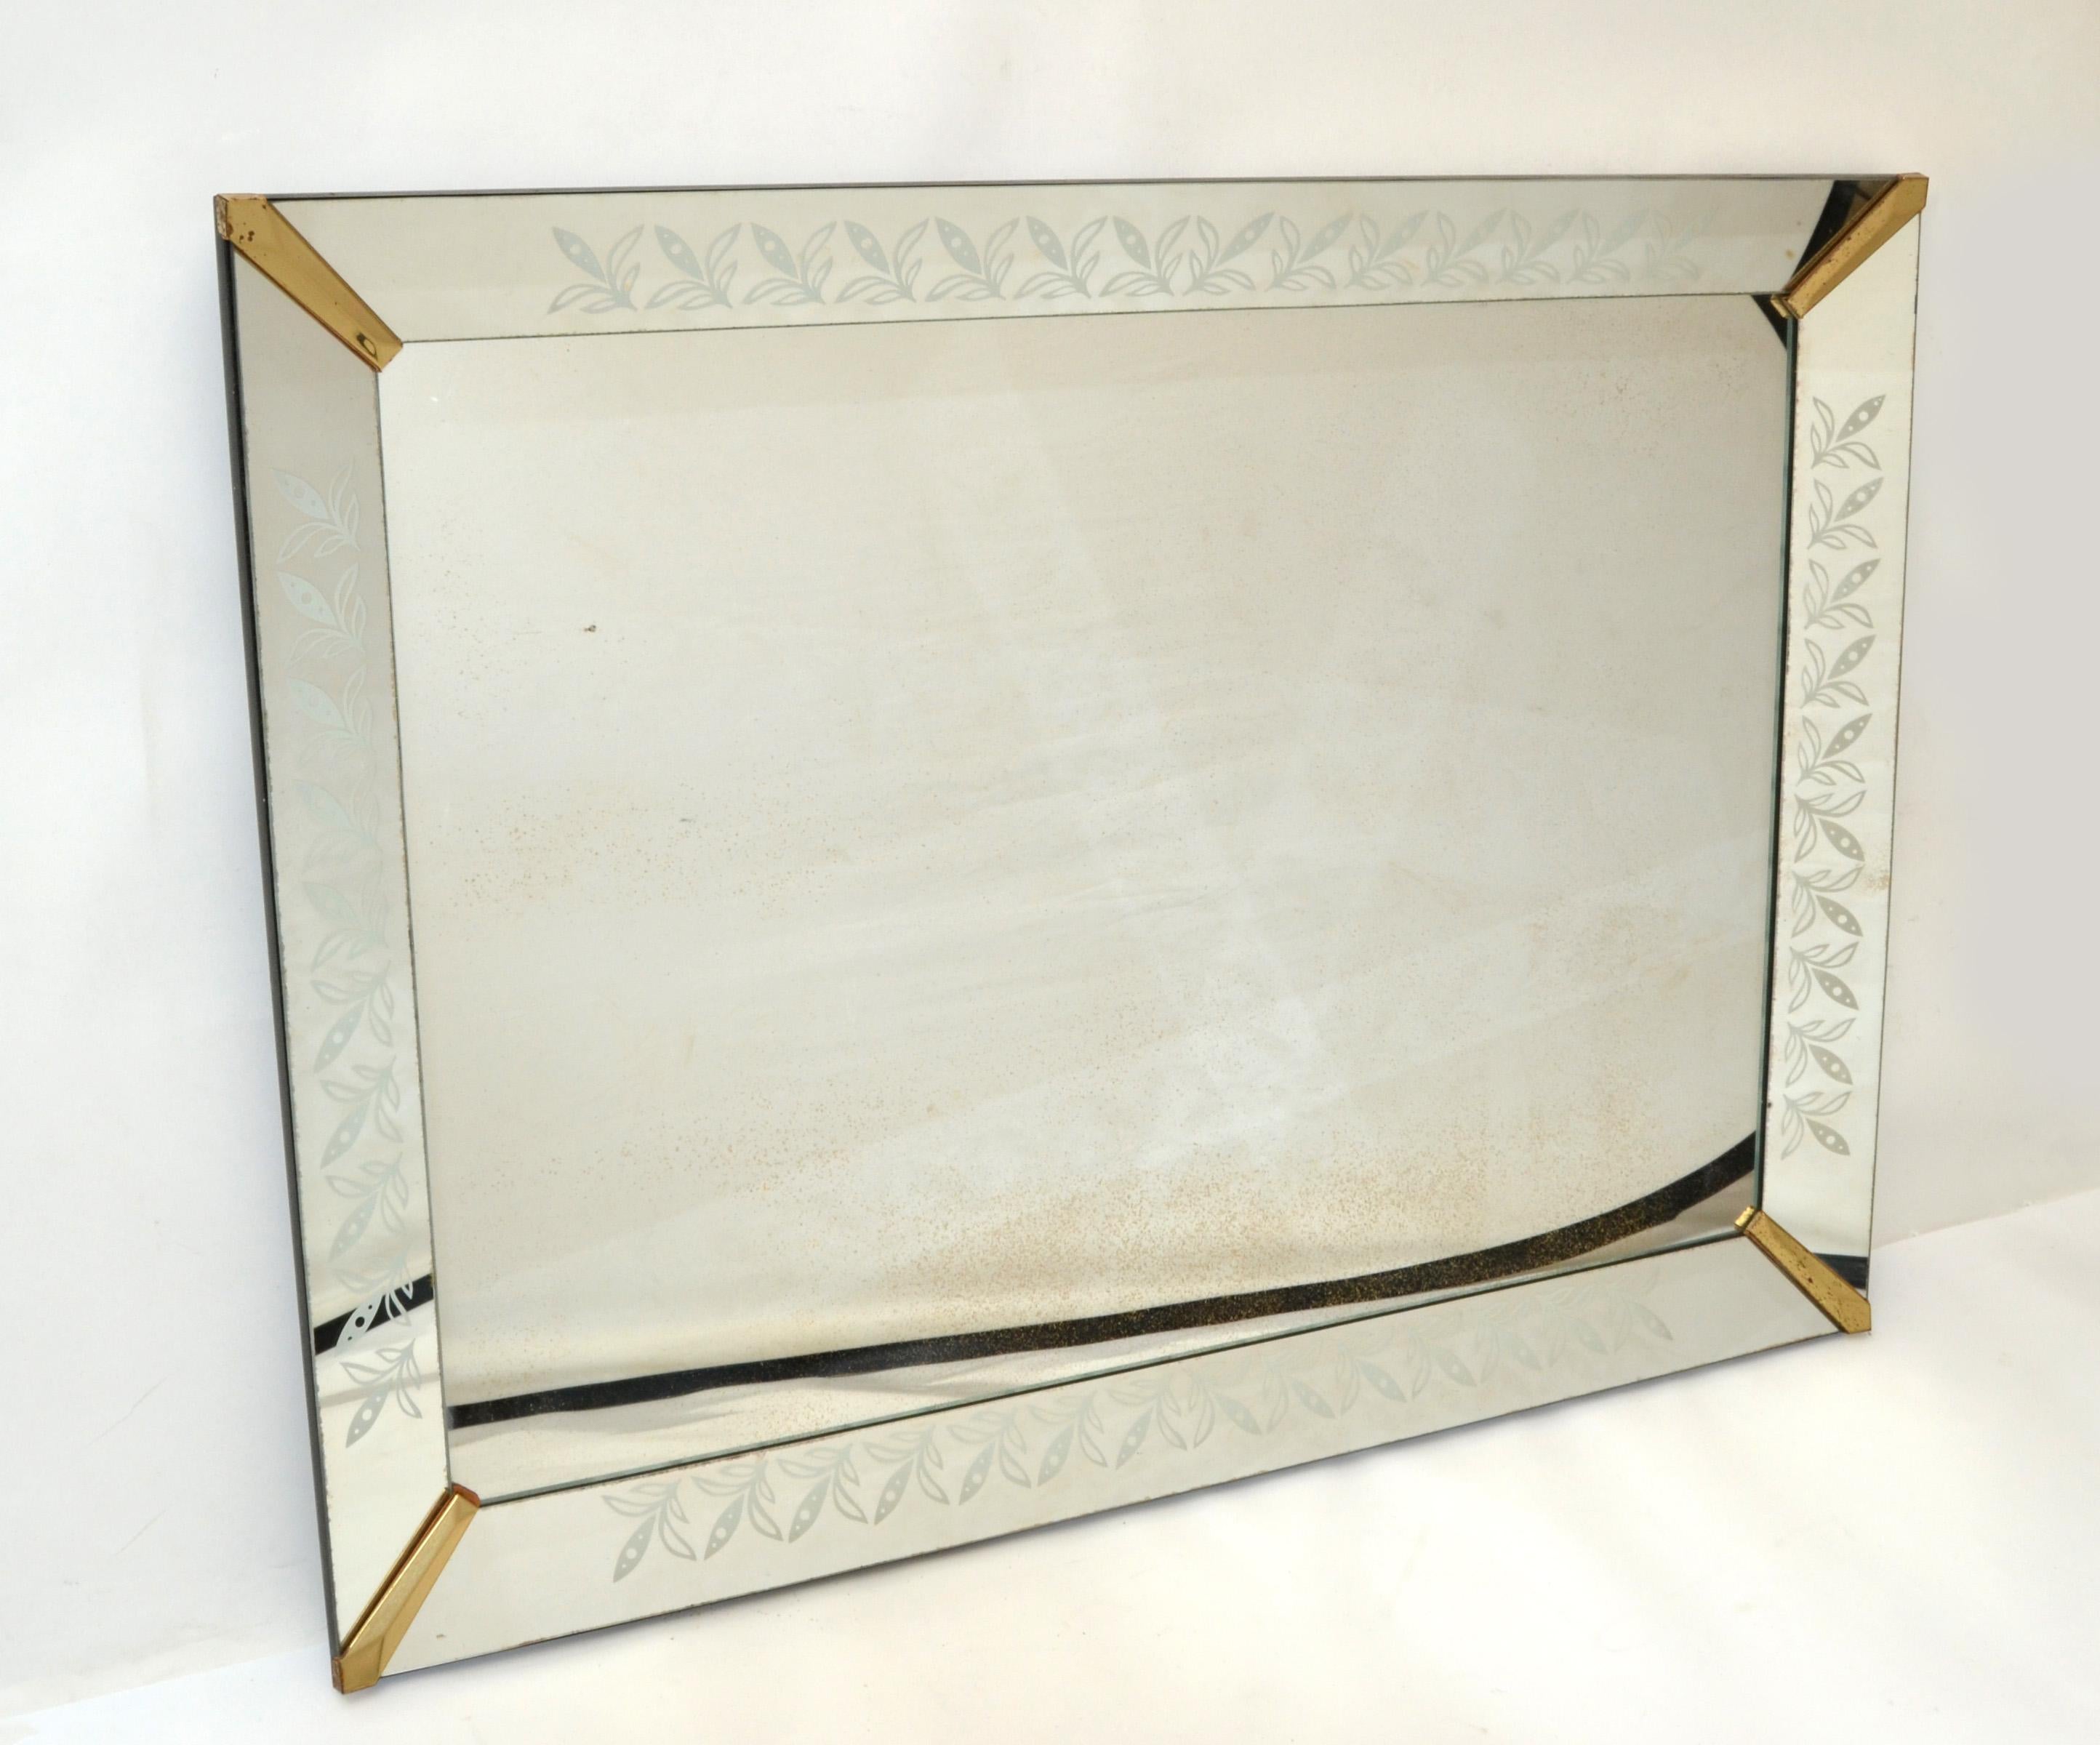 20th Century 1940s Art Deco Venetian Style Etched Wall Mirror with Brass Finished Corners